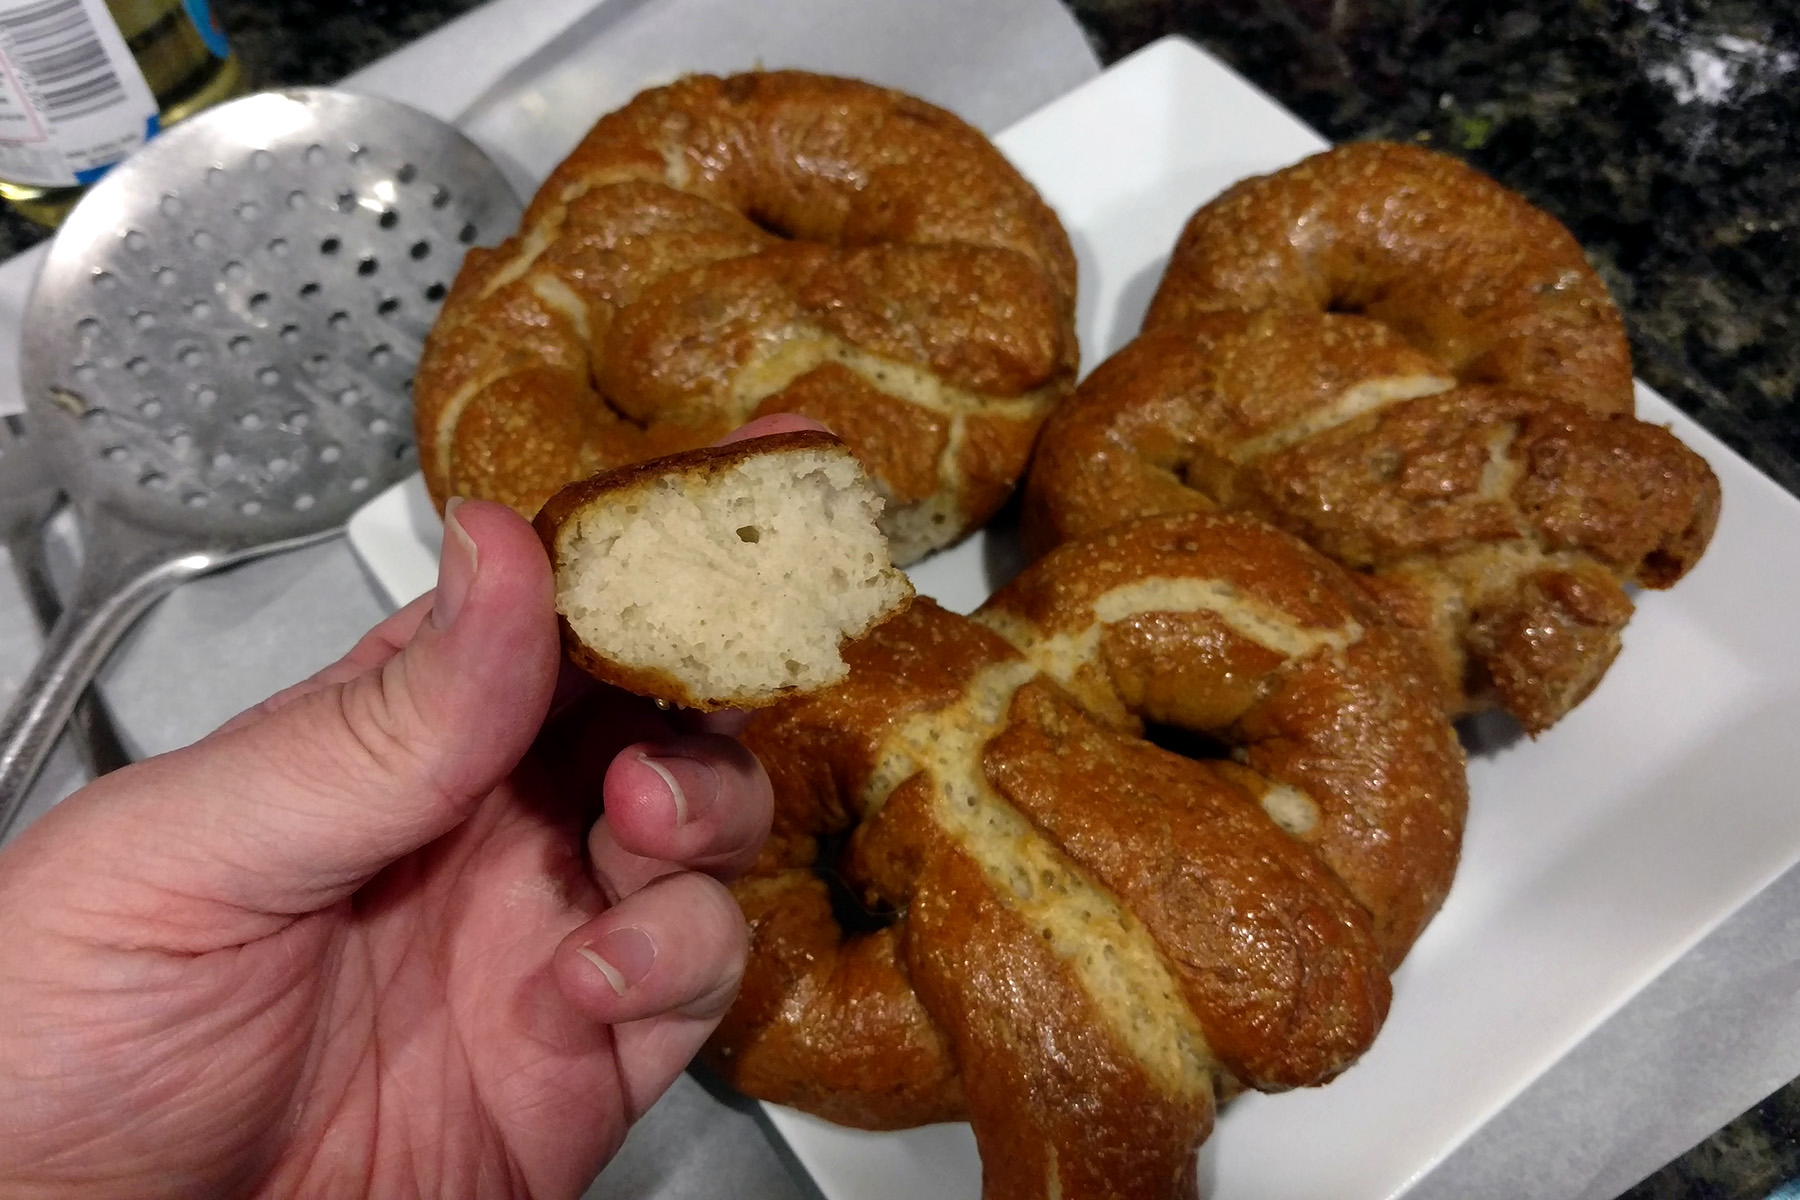 3 gluten free pretzels on a plate, and a hand holding a piece of soft pretzel in the foreground.